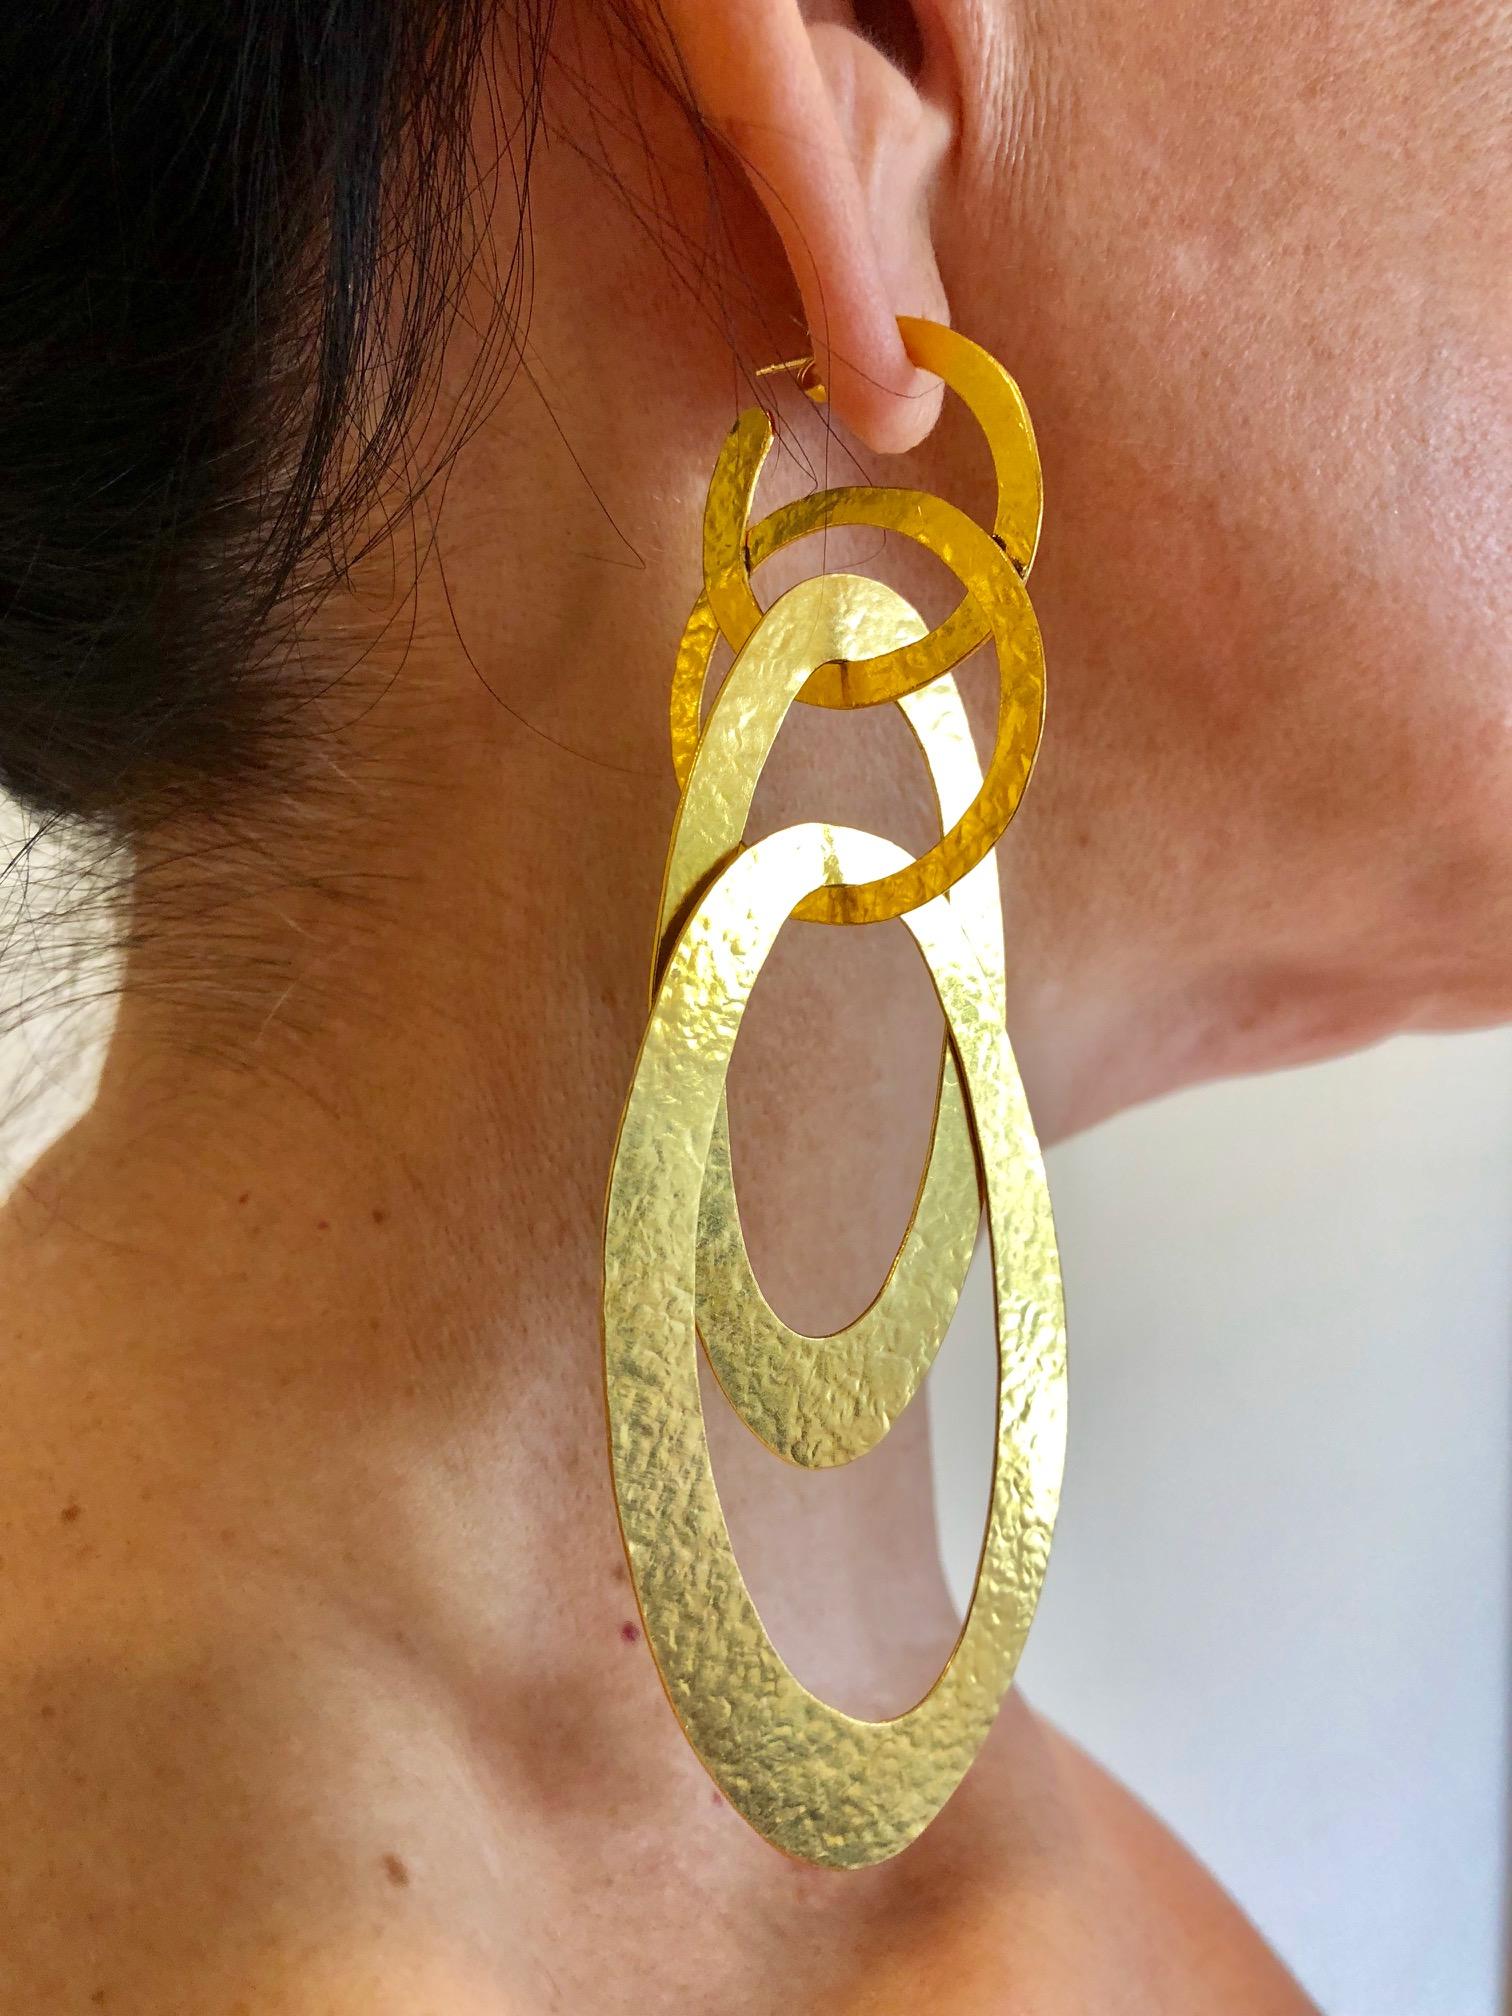 Stunning fashion-forward Parisian statement earrings!  Unique creativity and design mean handcrafted quality in geometric harmony by a Parisian hand in the Marais. The geometric pierced earrings are comprised out of four lightweight hammered